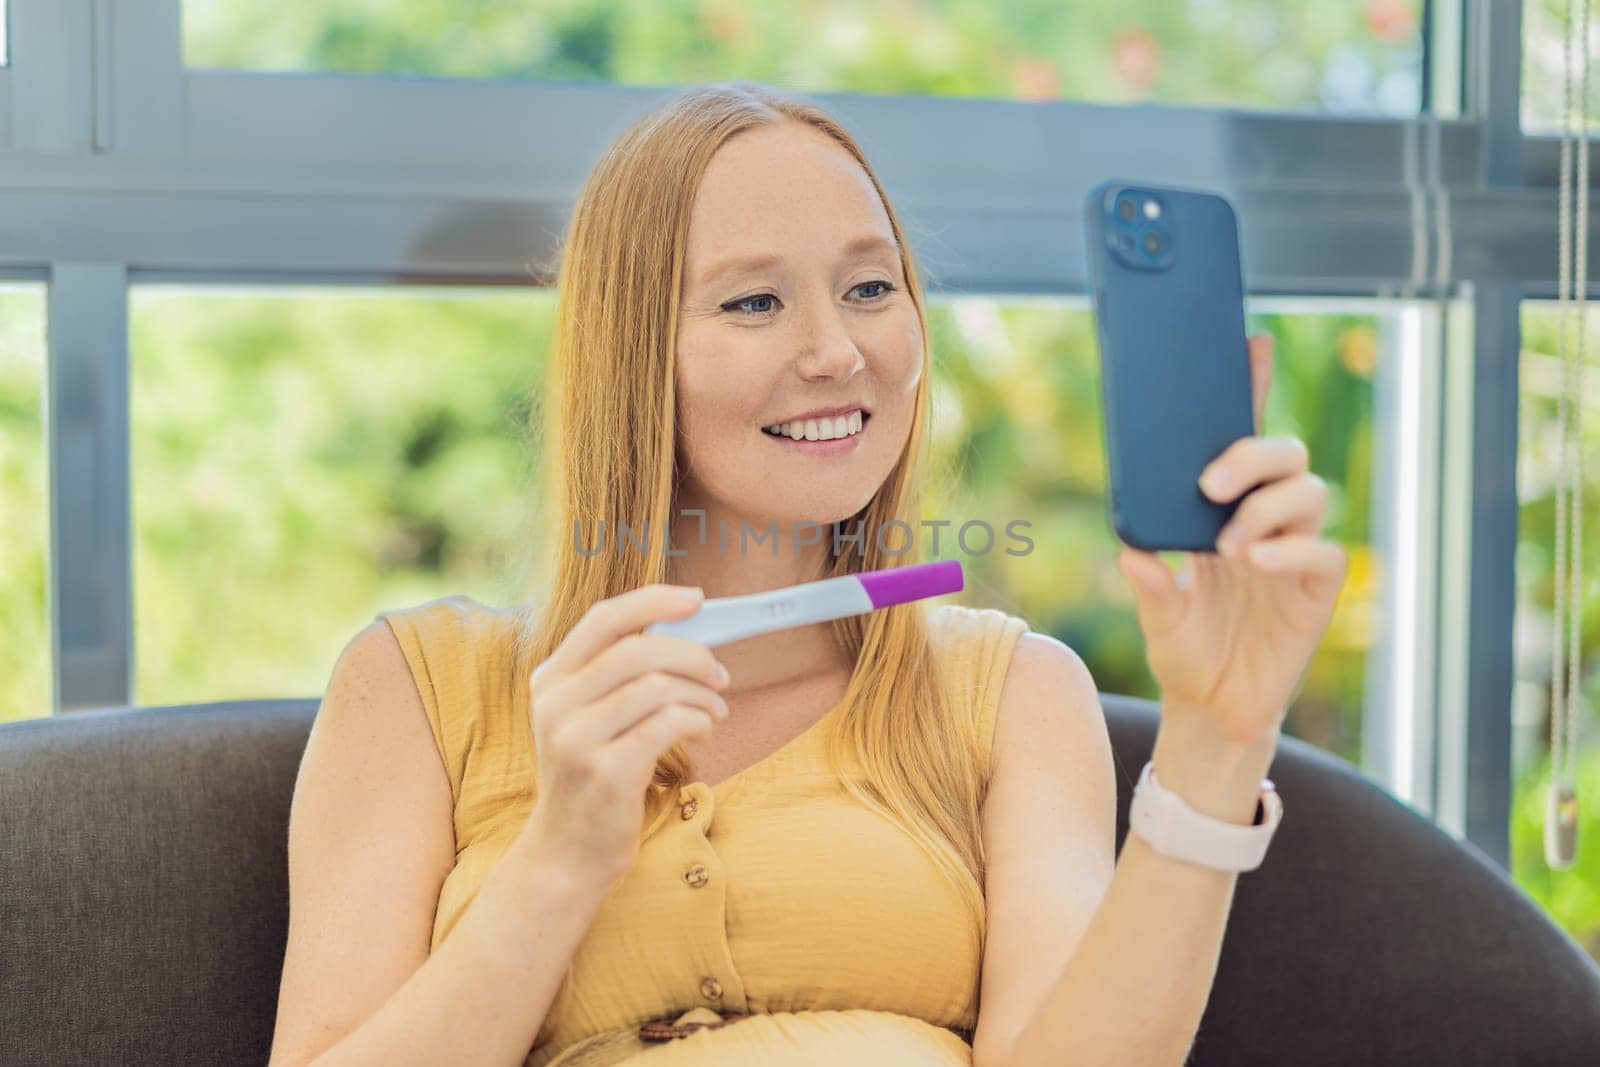 Expectant woman shares joyous news, showing her pregnancy test via video call with excitement and happiness.